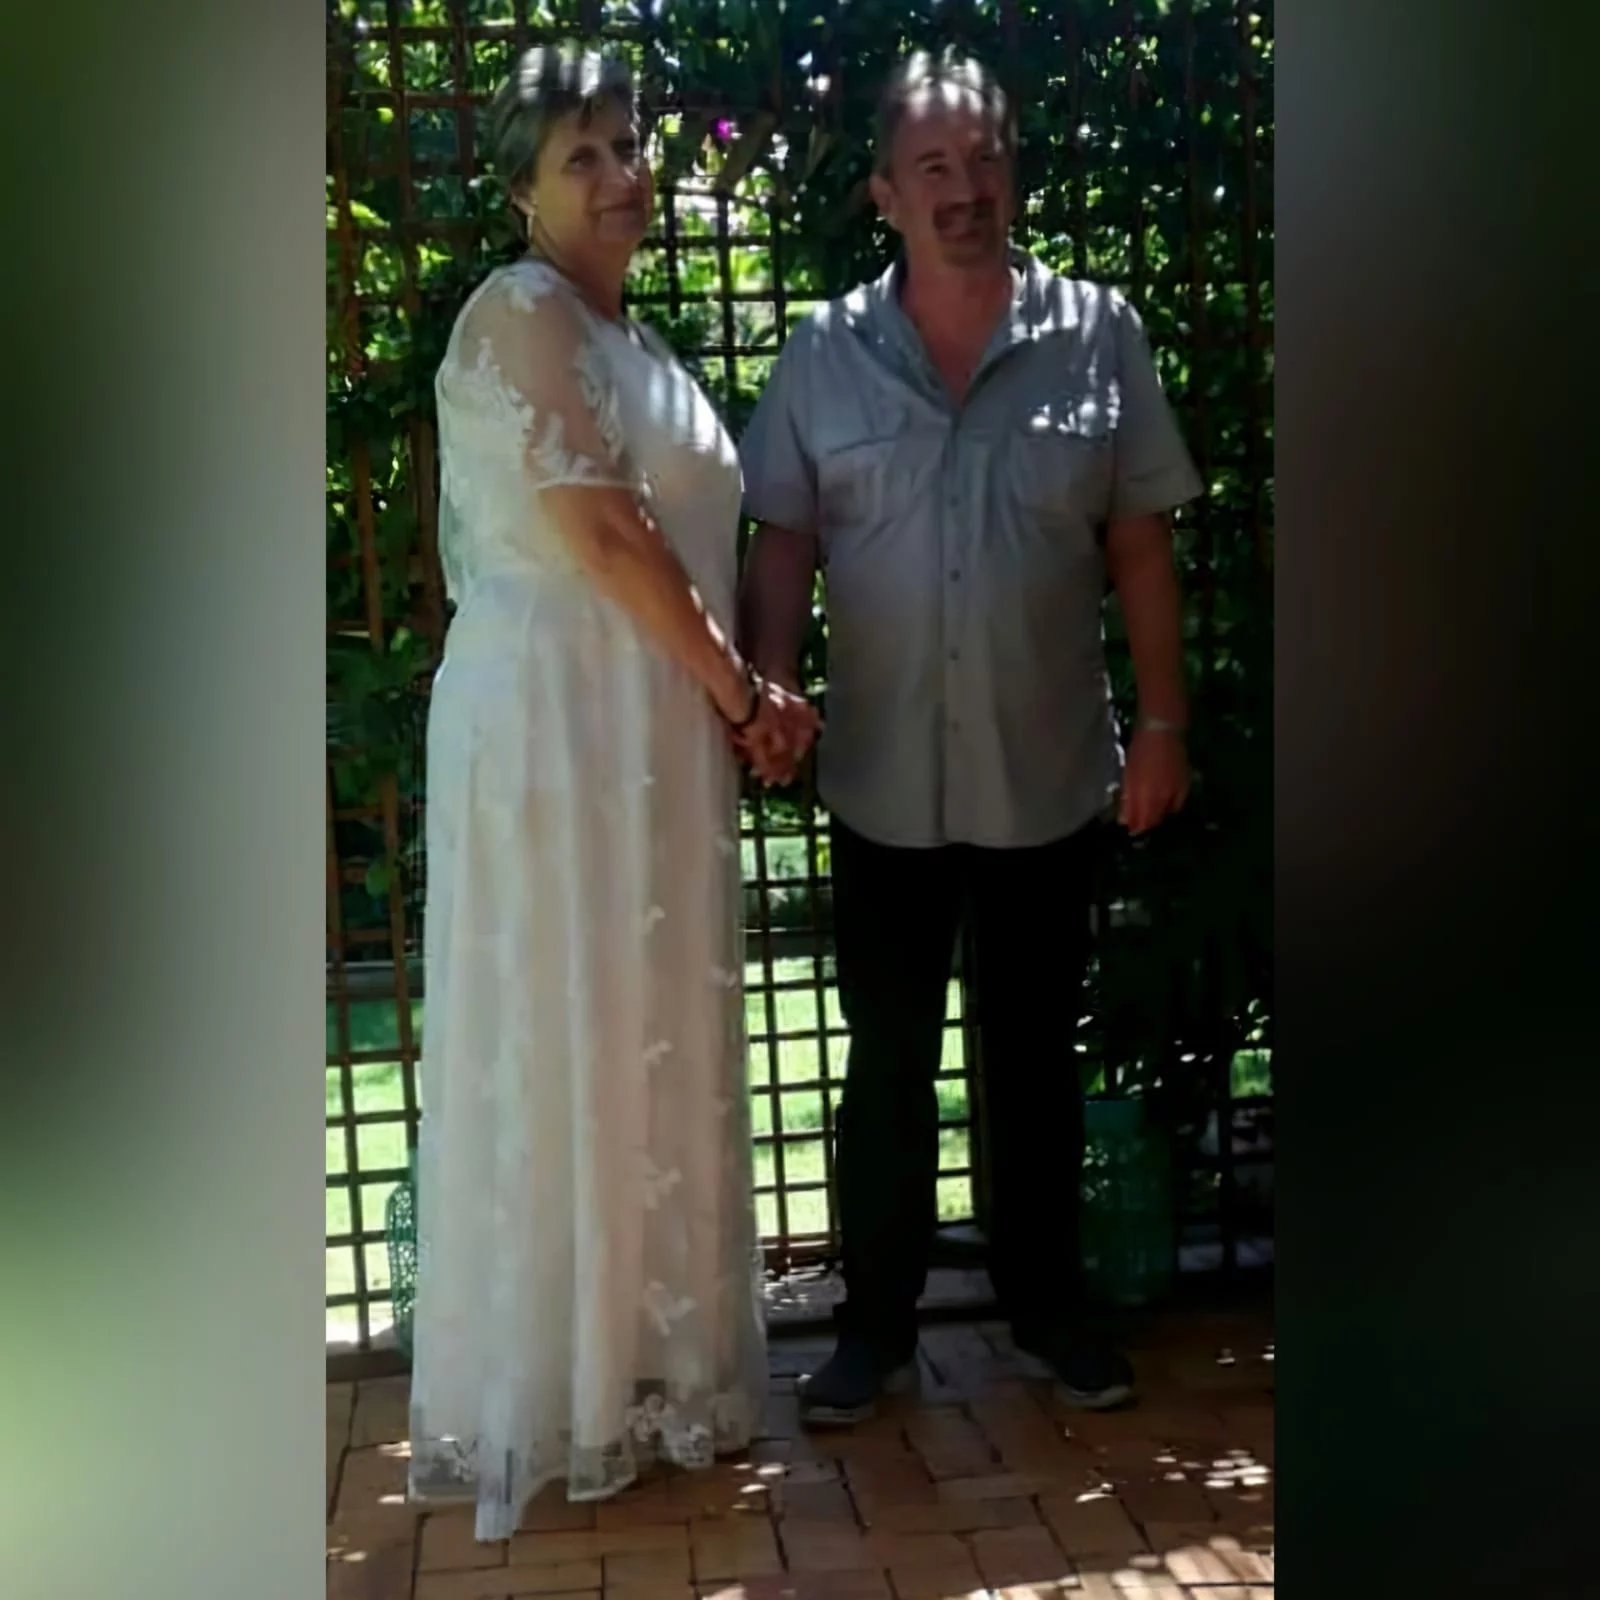 Simple elegant off white fully lace wedding dress 4 wedding dress designed and made for my client in south africa johannesburg. A simple elegant off white fully lace wedding dress. With a v neckline and wide sheer bell sleeves.